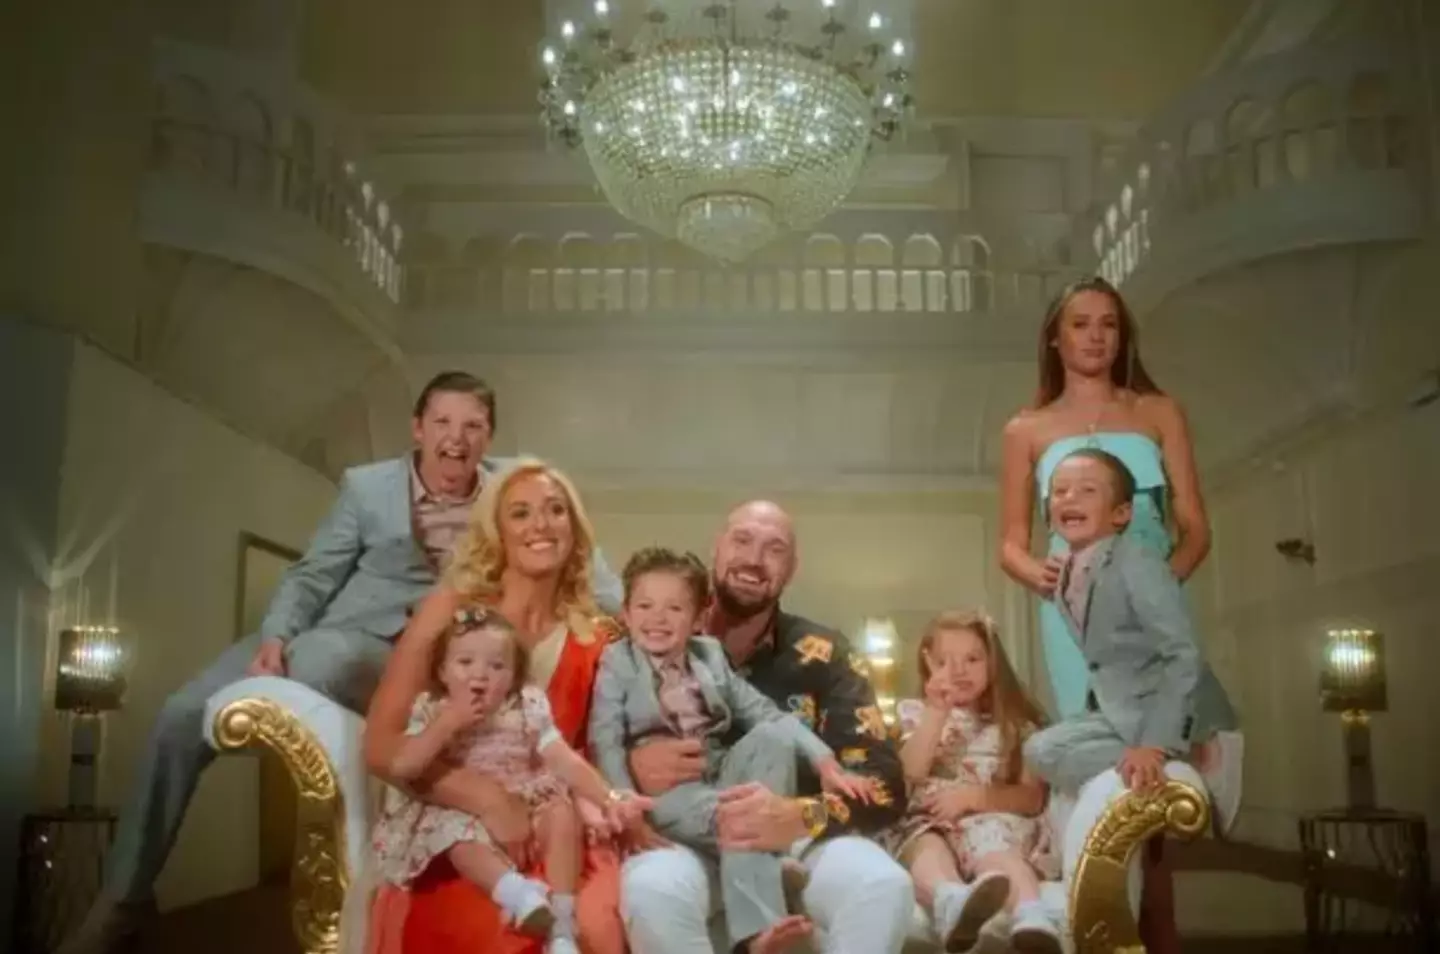 Tyson Fury and his family are now the stars of a Netflix series.